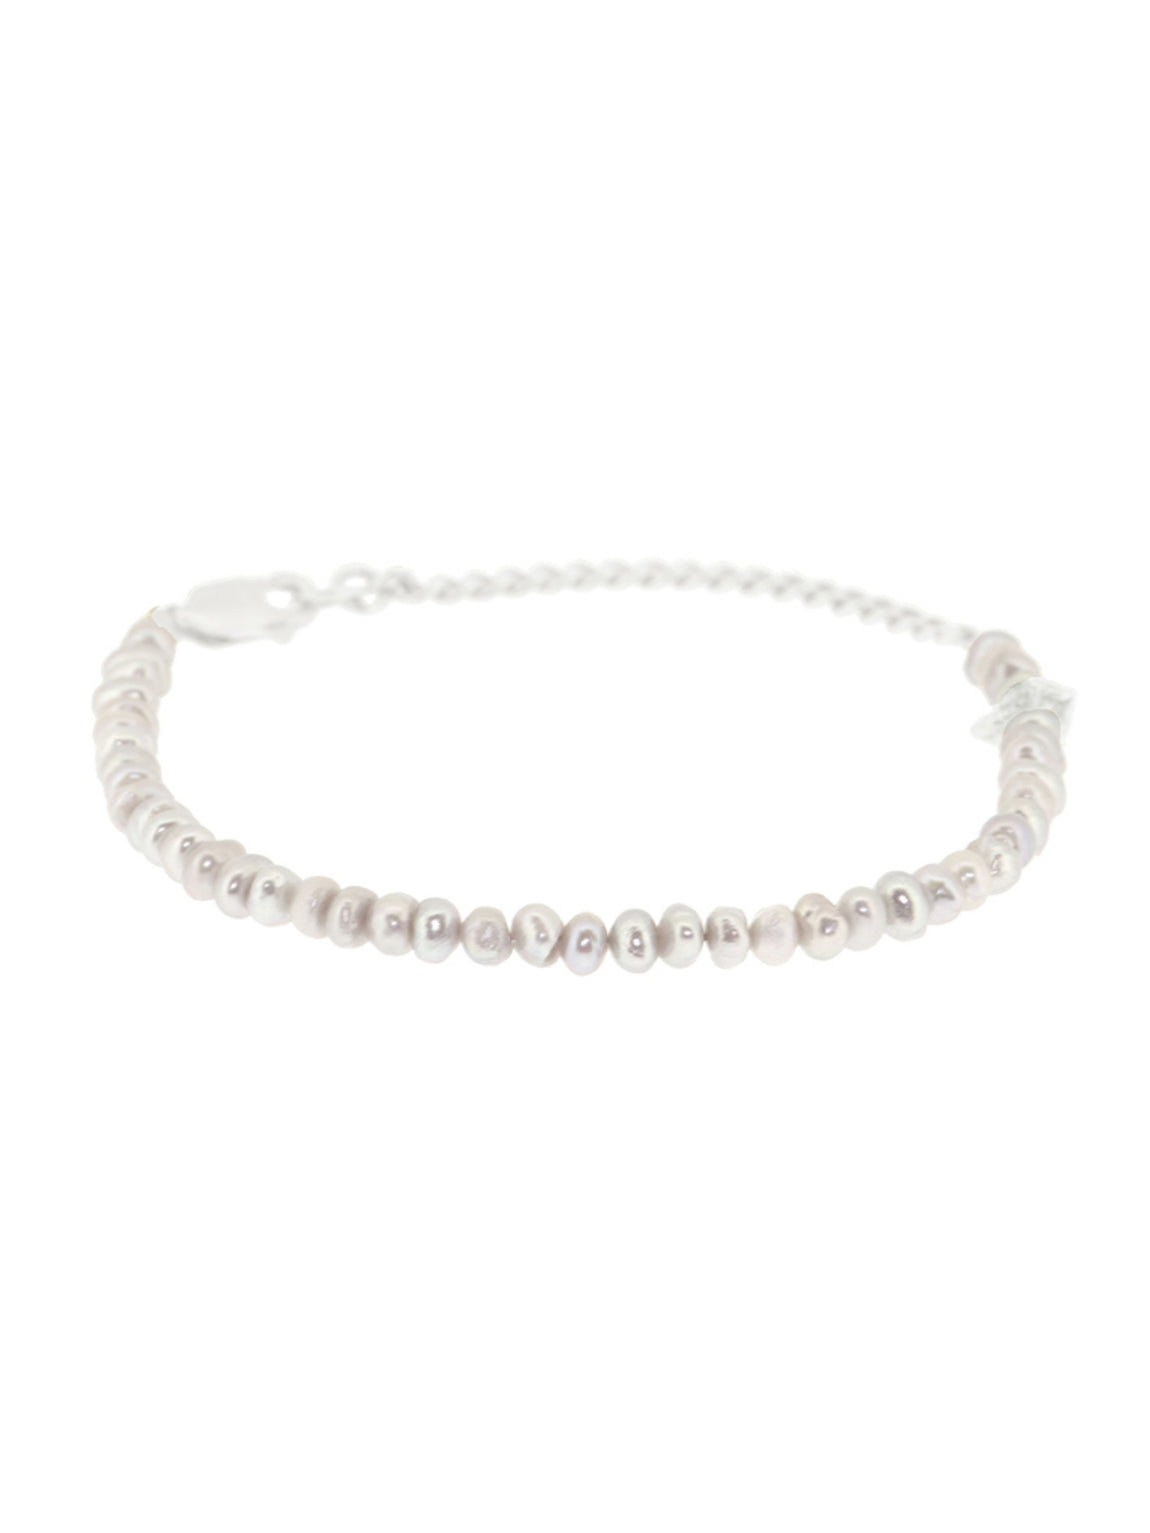 Love right back - Grey Pearl | 925 Sterling Silver